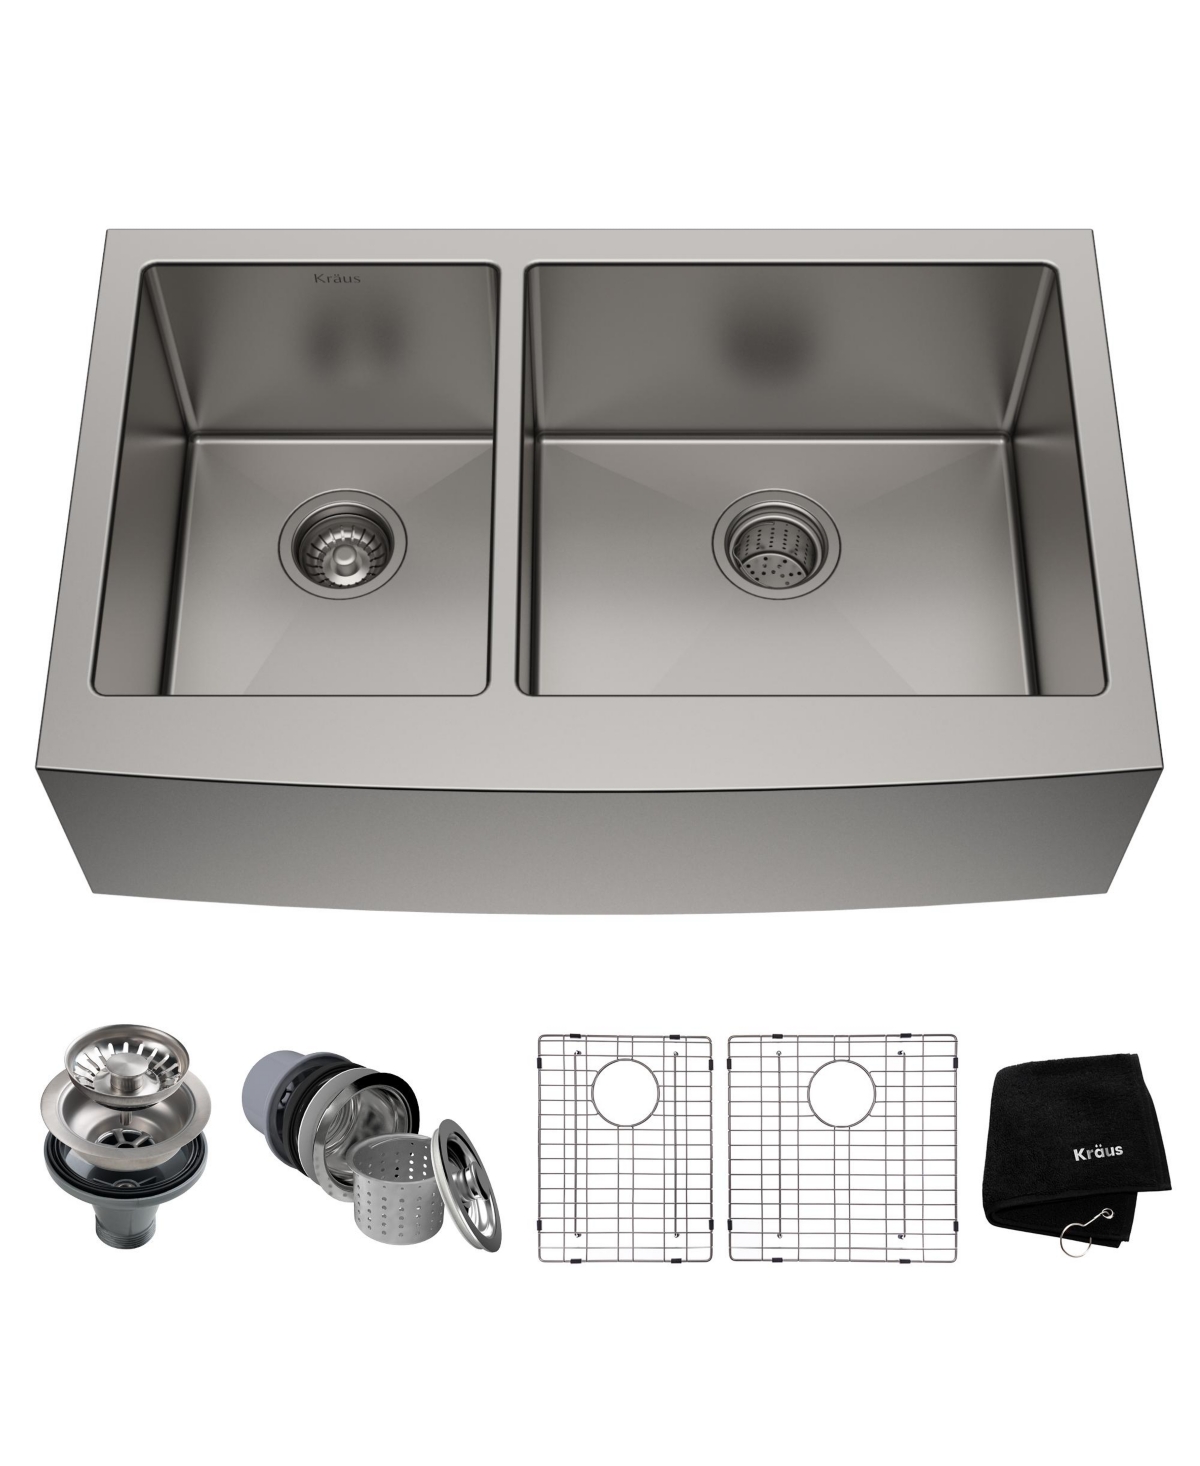 Standart Pro 33 in. 16 Gauge 40/60 Double Bowl Stainless Steel Farmhouse Kitchen Sink - Stainless steel